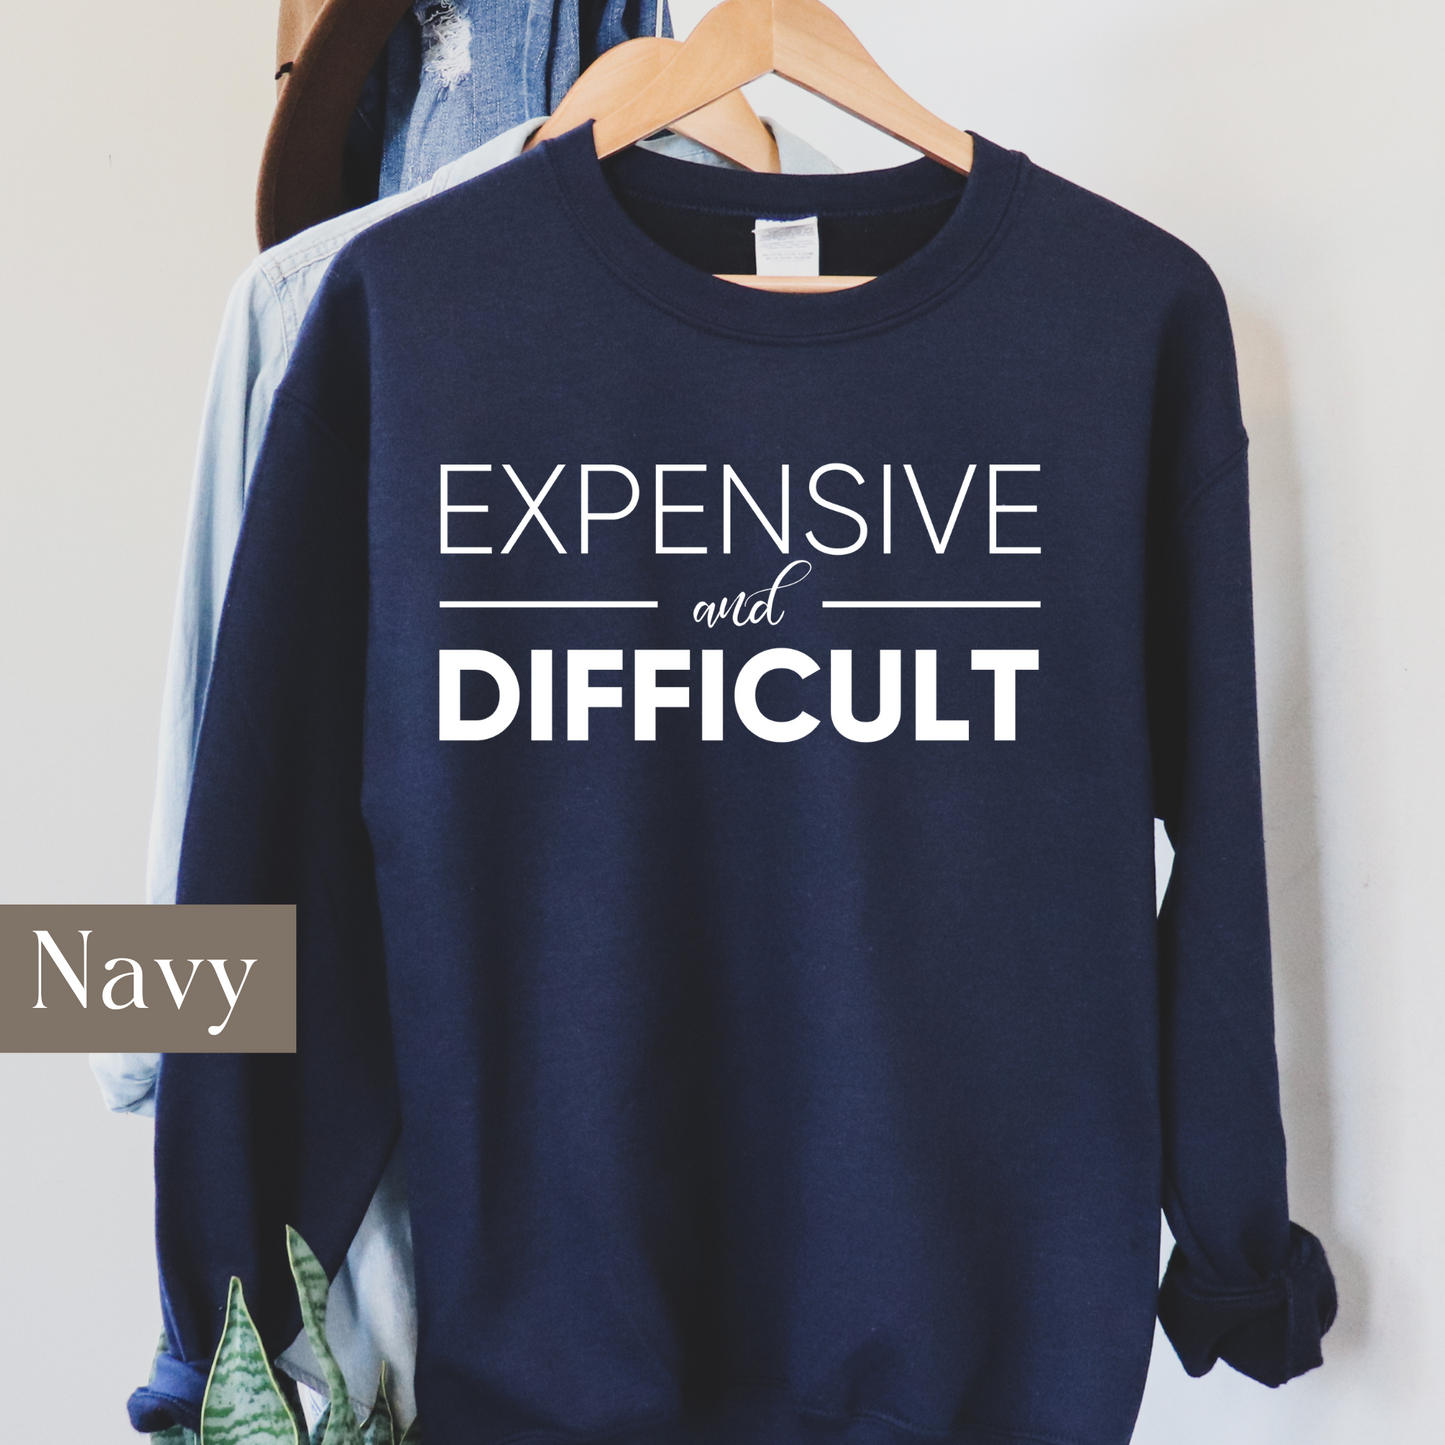 Expensive and Difficult - Sweatshirt